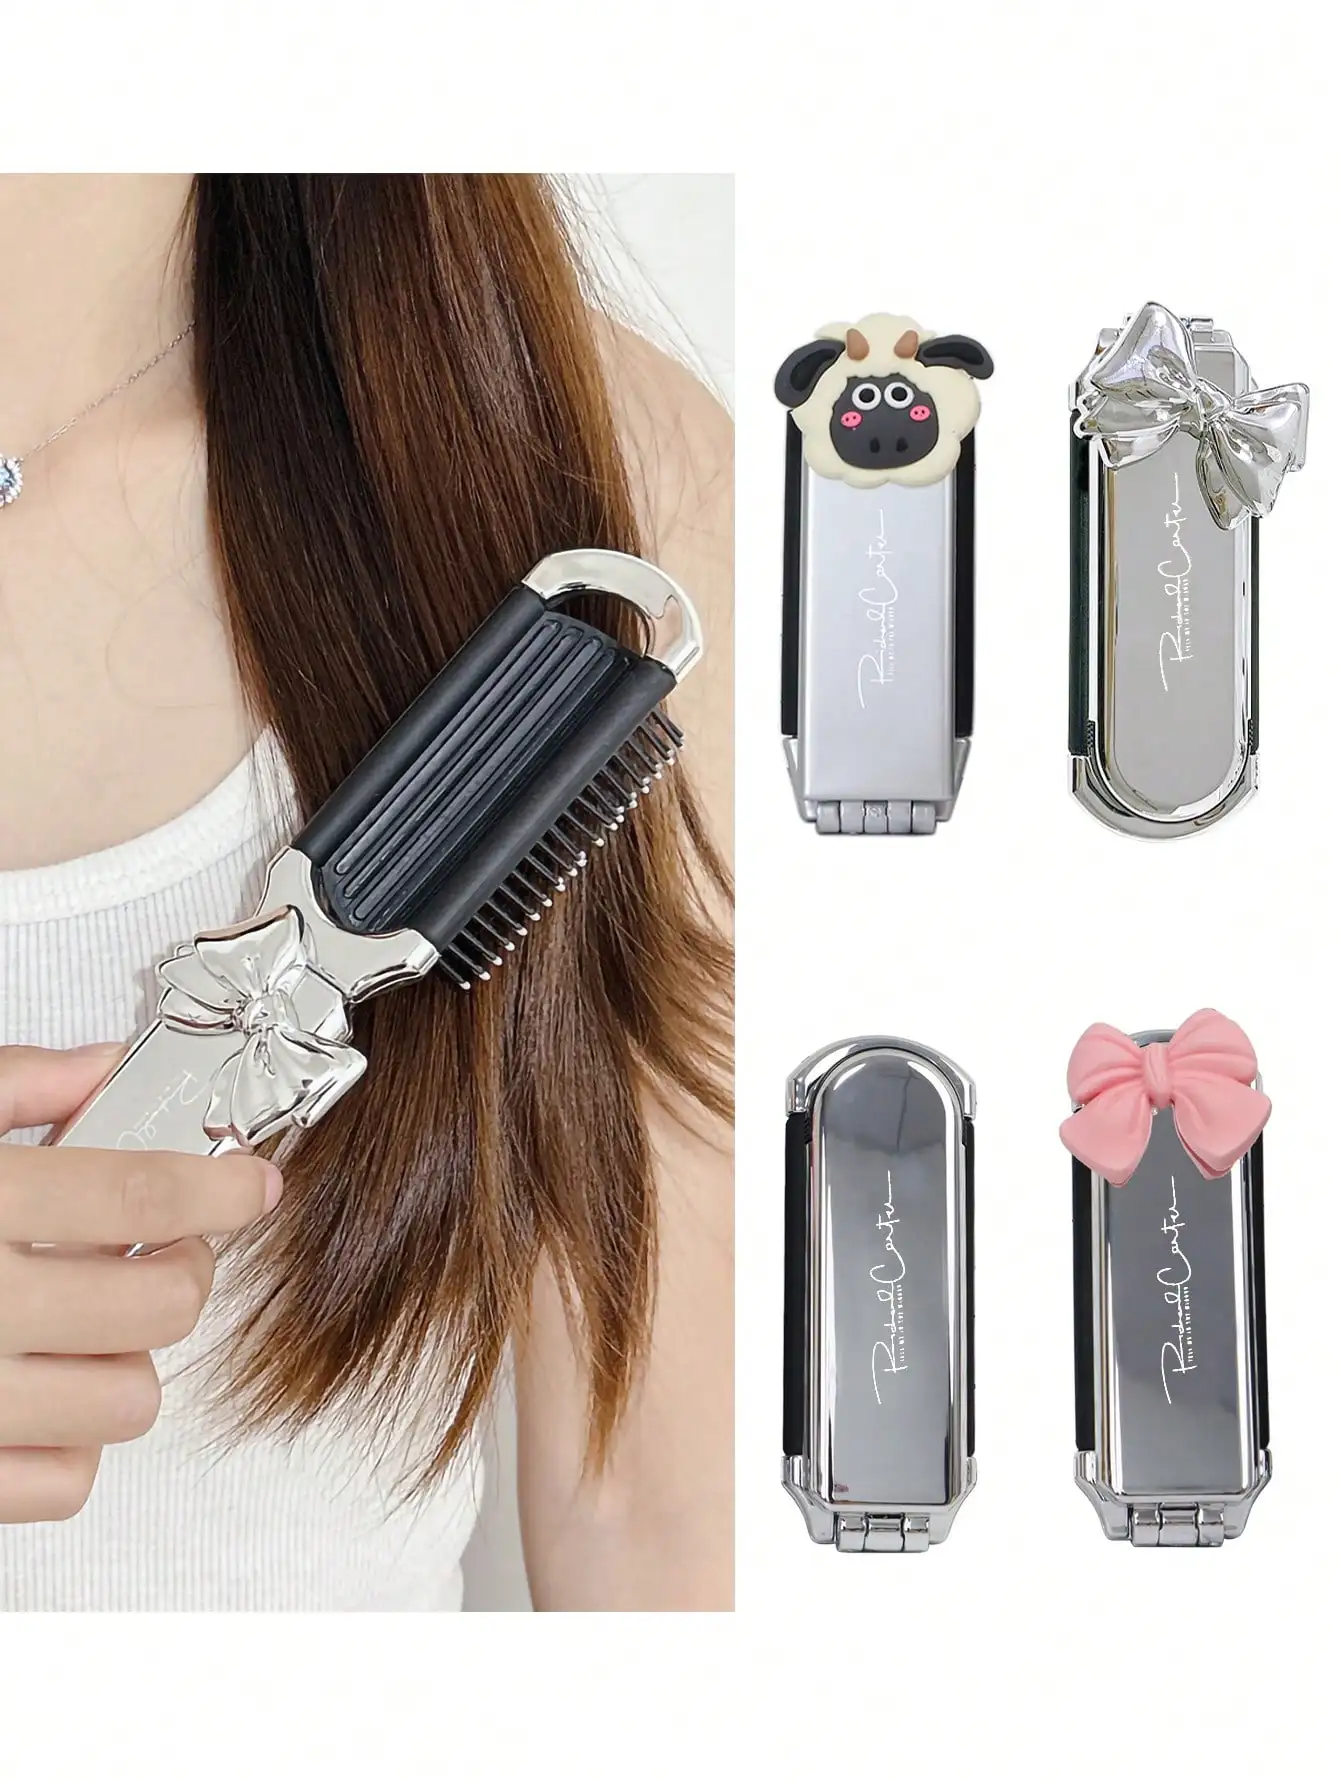 1pcs Folding Hairdressing Comb With Makeup Mirror, Portable Air Cushion Comb, Suitable For Daily Outgoing Travel Use clothes backpack travel carrier backpack outgoing backpack organization backpack pretend play for children kids toddler